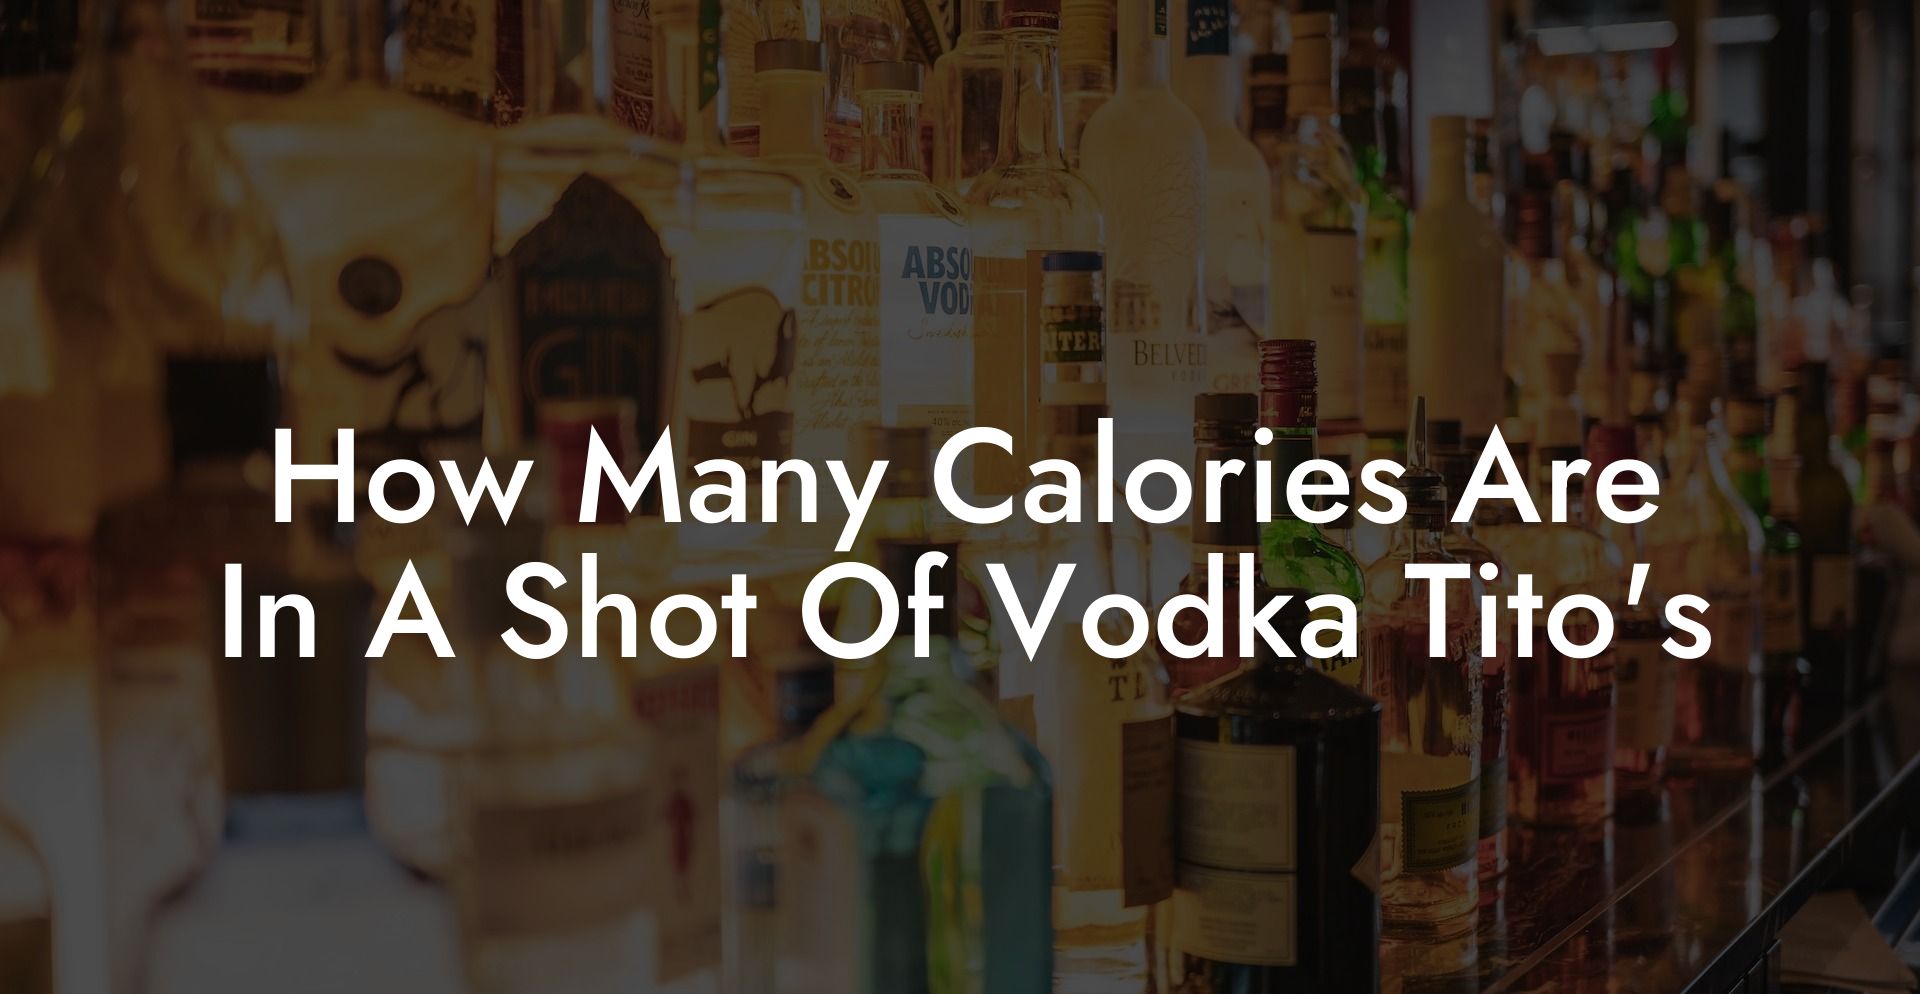 How Many Calories Are In A Shot Of Vodka Tito's